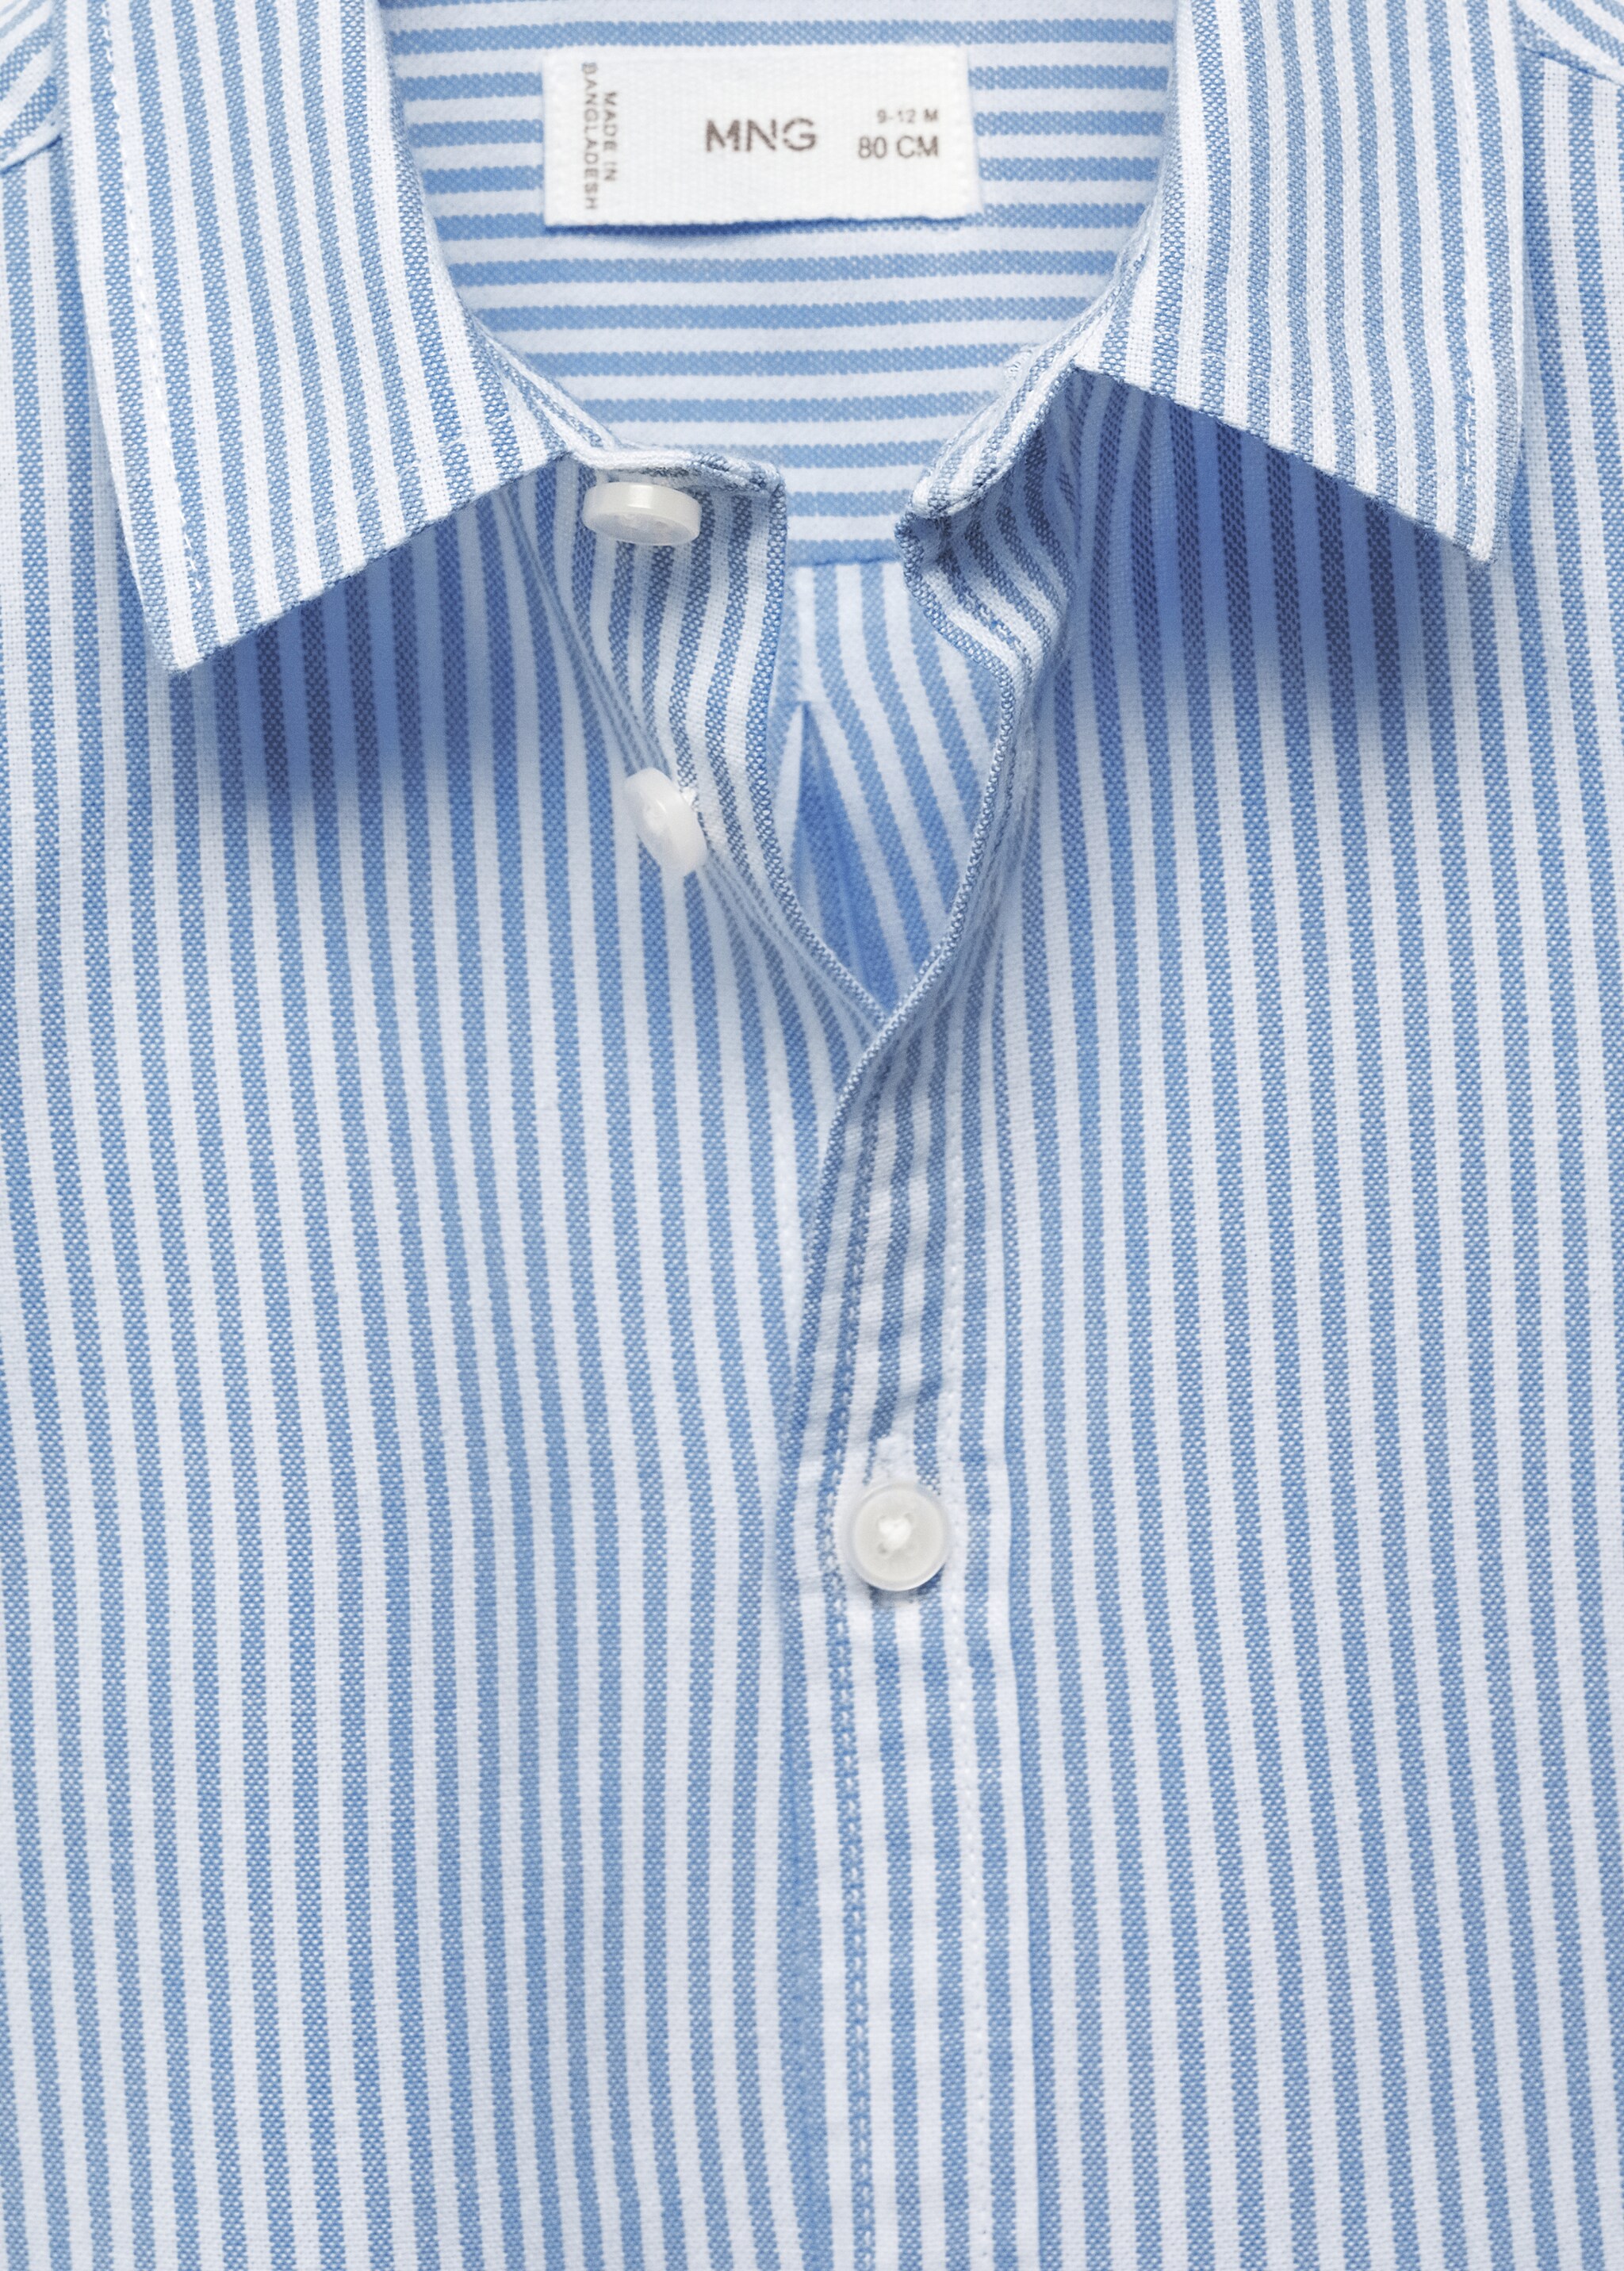 Oxford cotton shirt - Details of the article 8